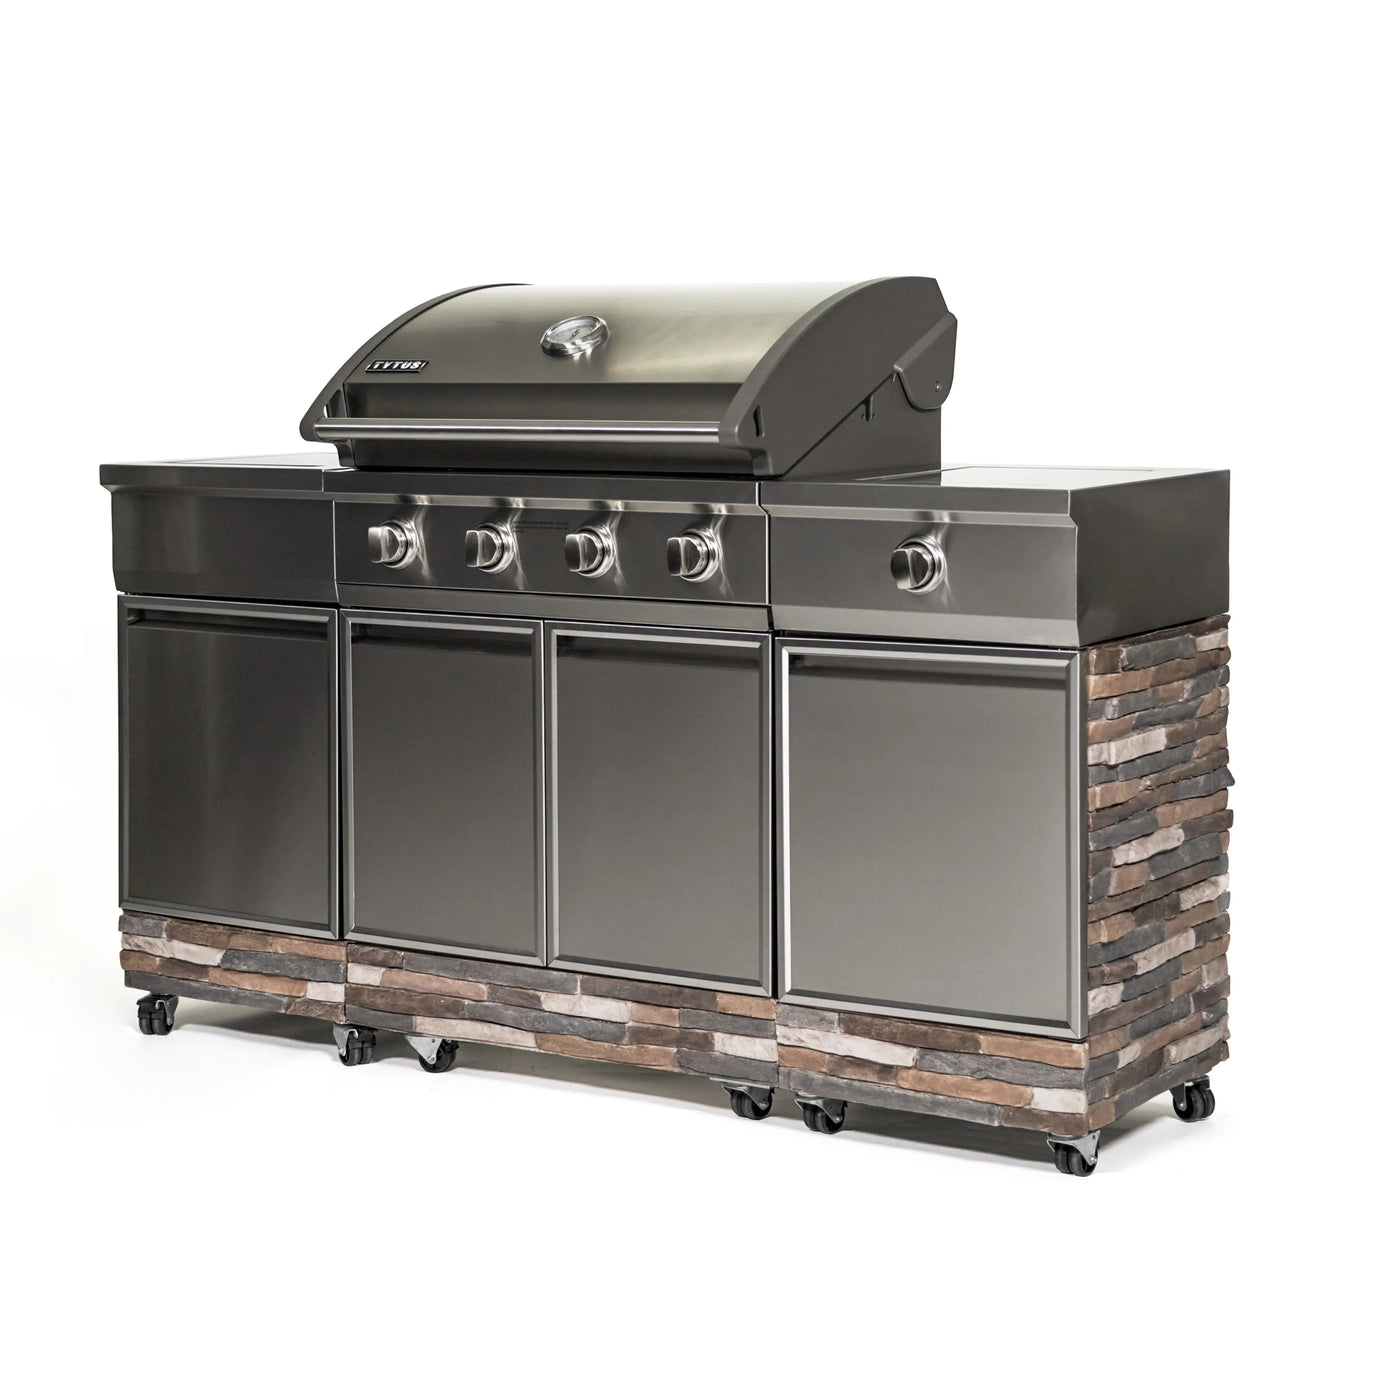 Ash Stacked Stone Island Grill